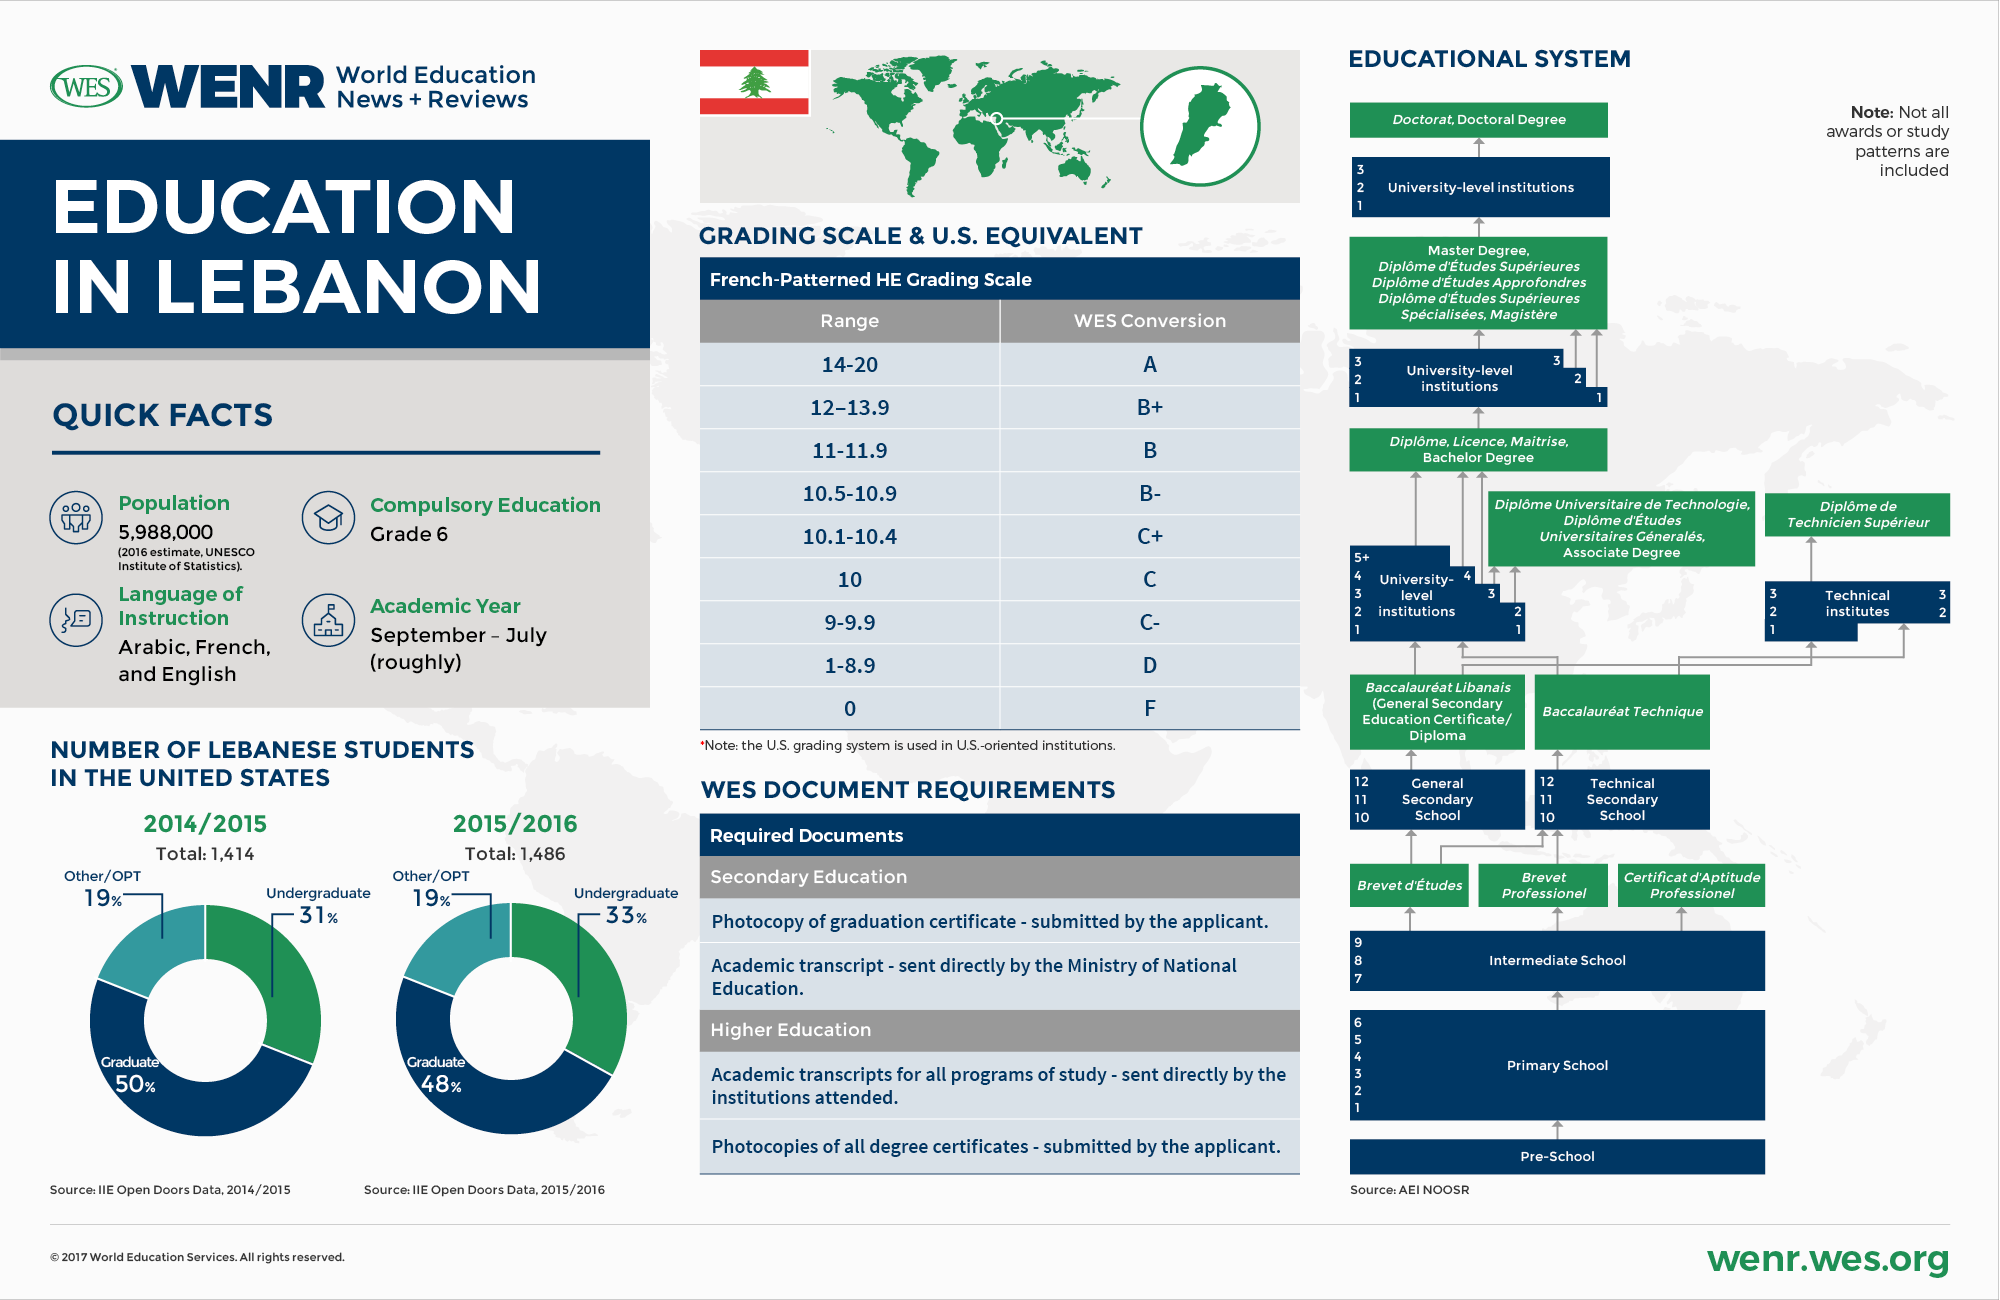 An infographic with fast facts about Lebanon's education system and international student mobility landscape. 